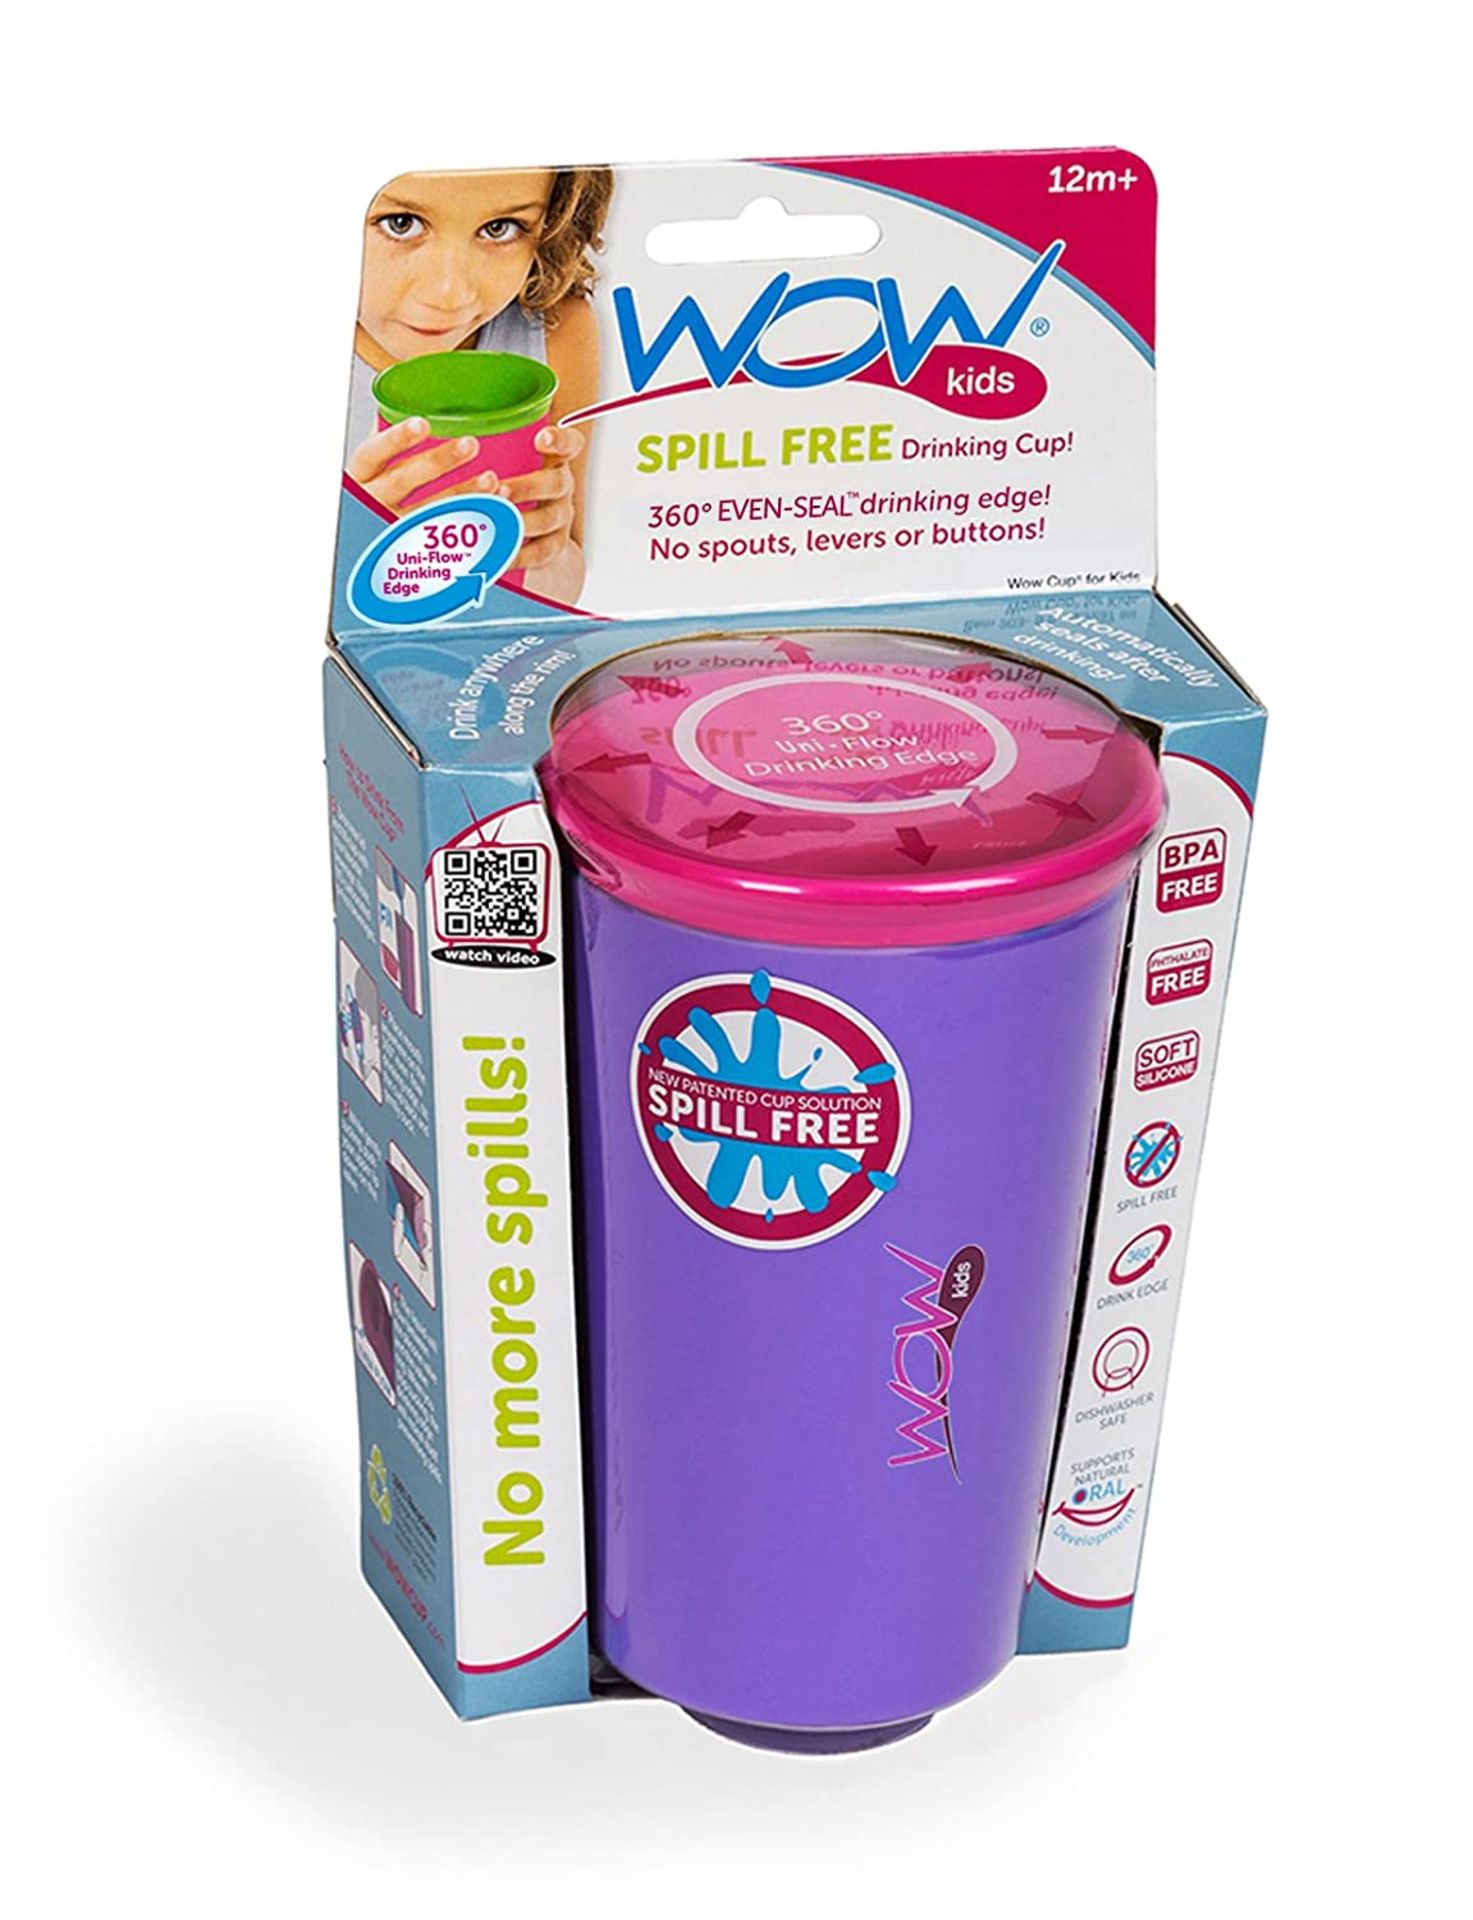 240 X SPILL FREE DRINKING CUP FOR KIDS -WOW INNOVATIVE DIFFERENT COLORS - RRP £1680 - Image 5 of 8